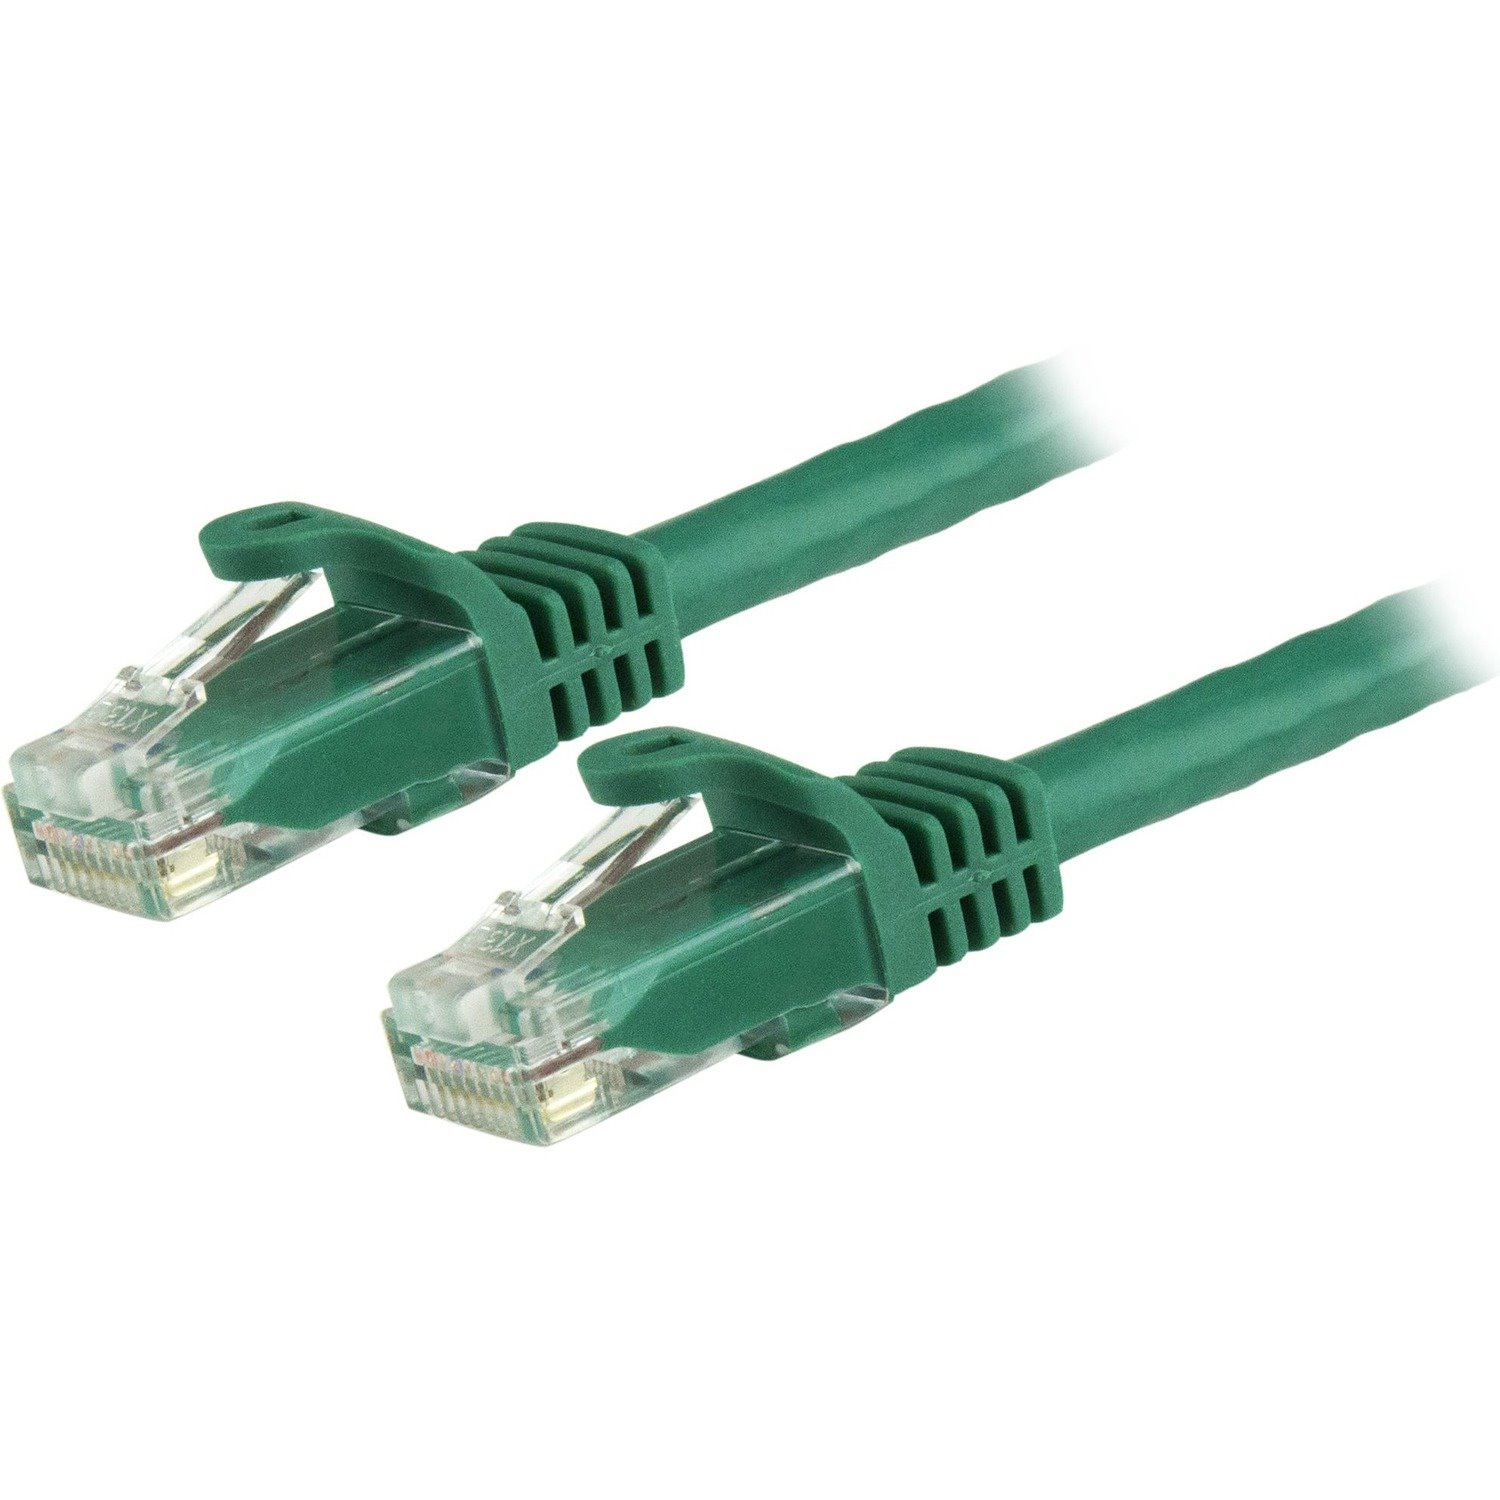 StarTech.com 5 m Category 6 Network Cable for Network Device, Wall Outlet, Workstation, Security Device, Distribution Panel, VoIP Device, Hub - 1